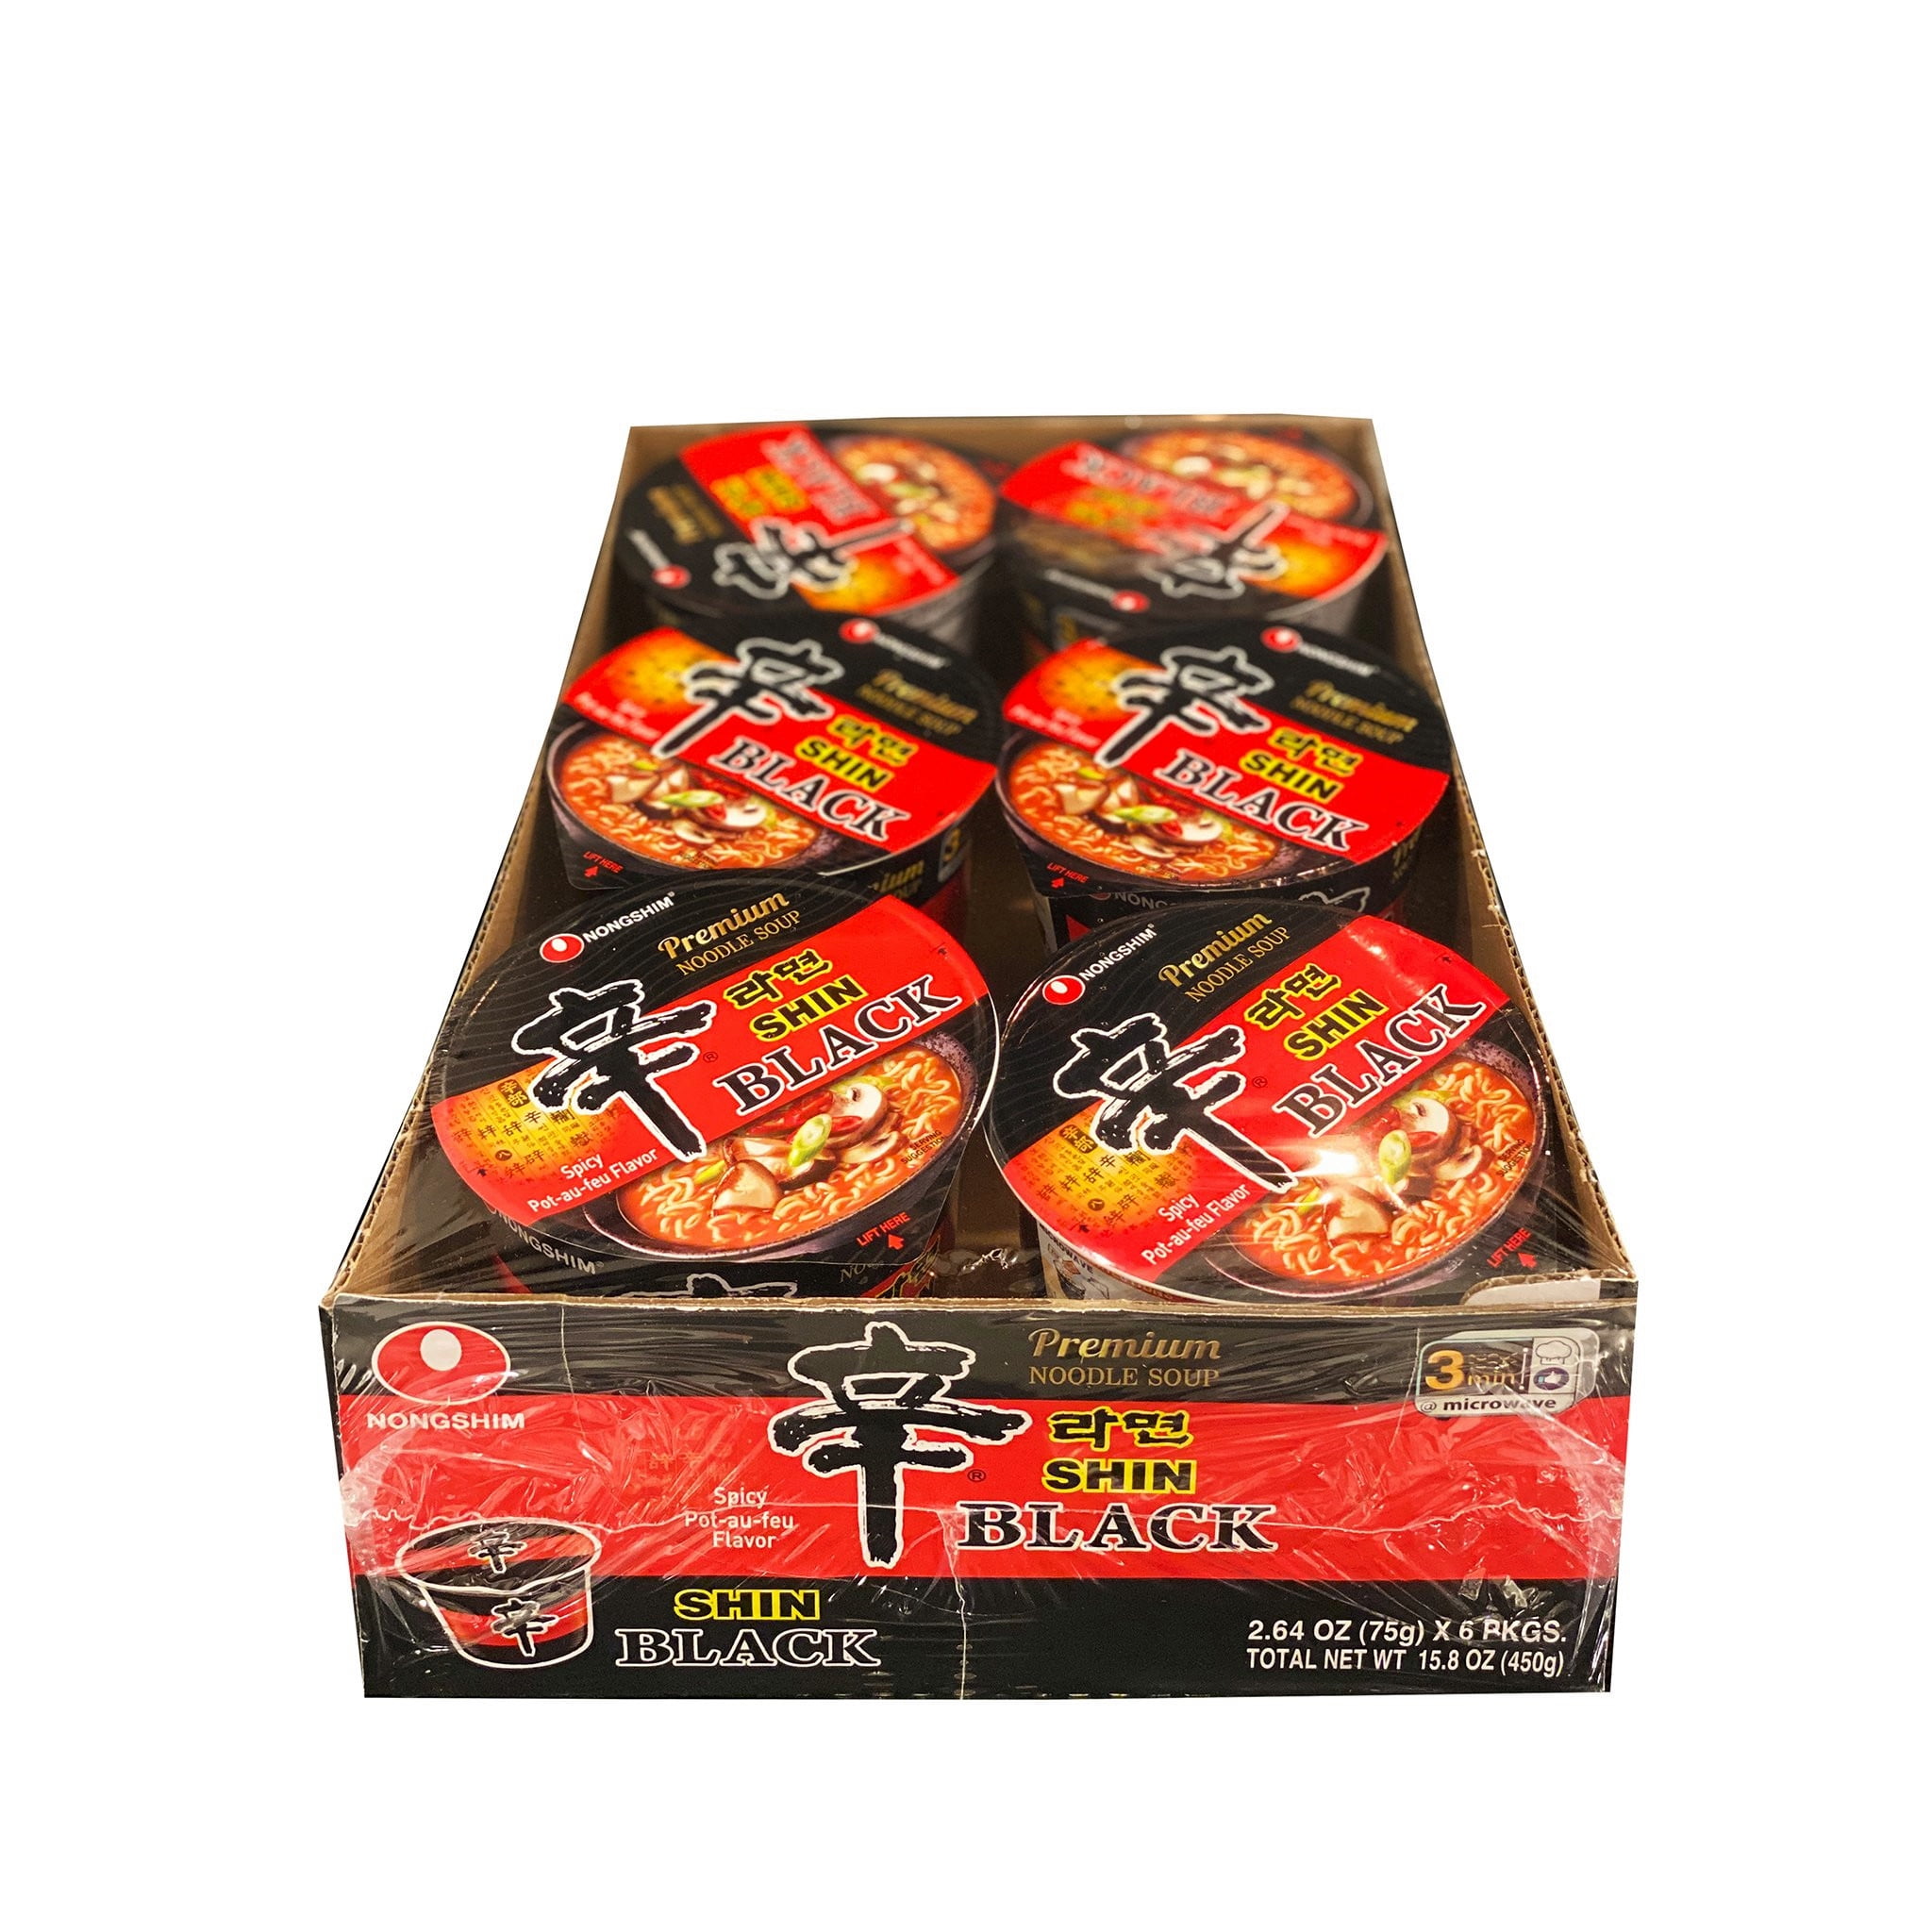 NongShim Shin Black Noodle Soup, Spicy, 2.64 Ounce (Pack of 6)